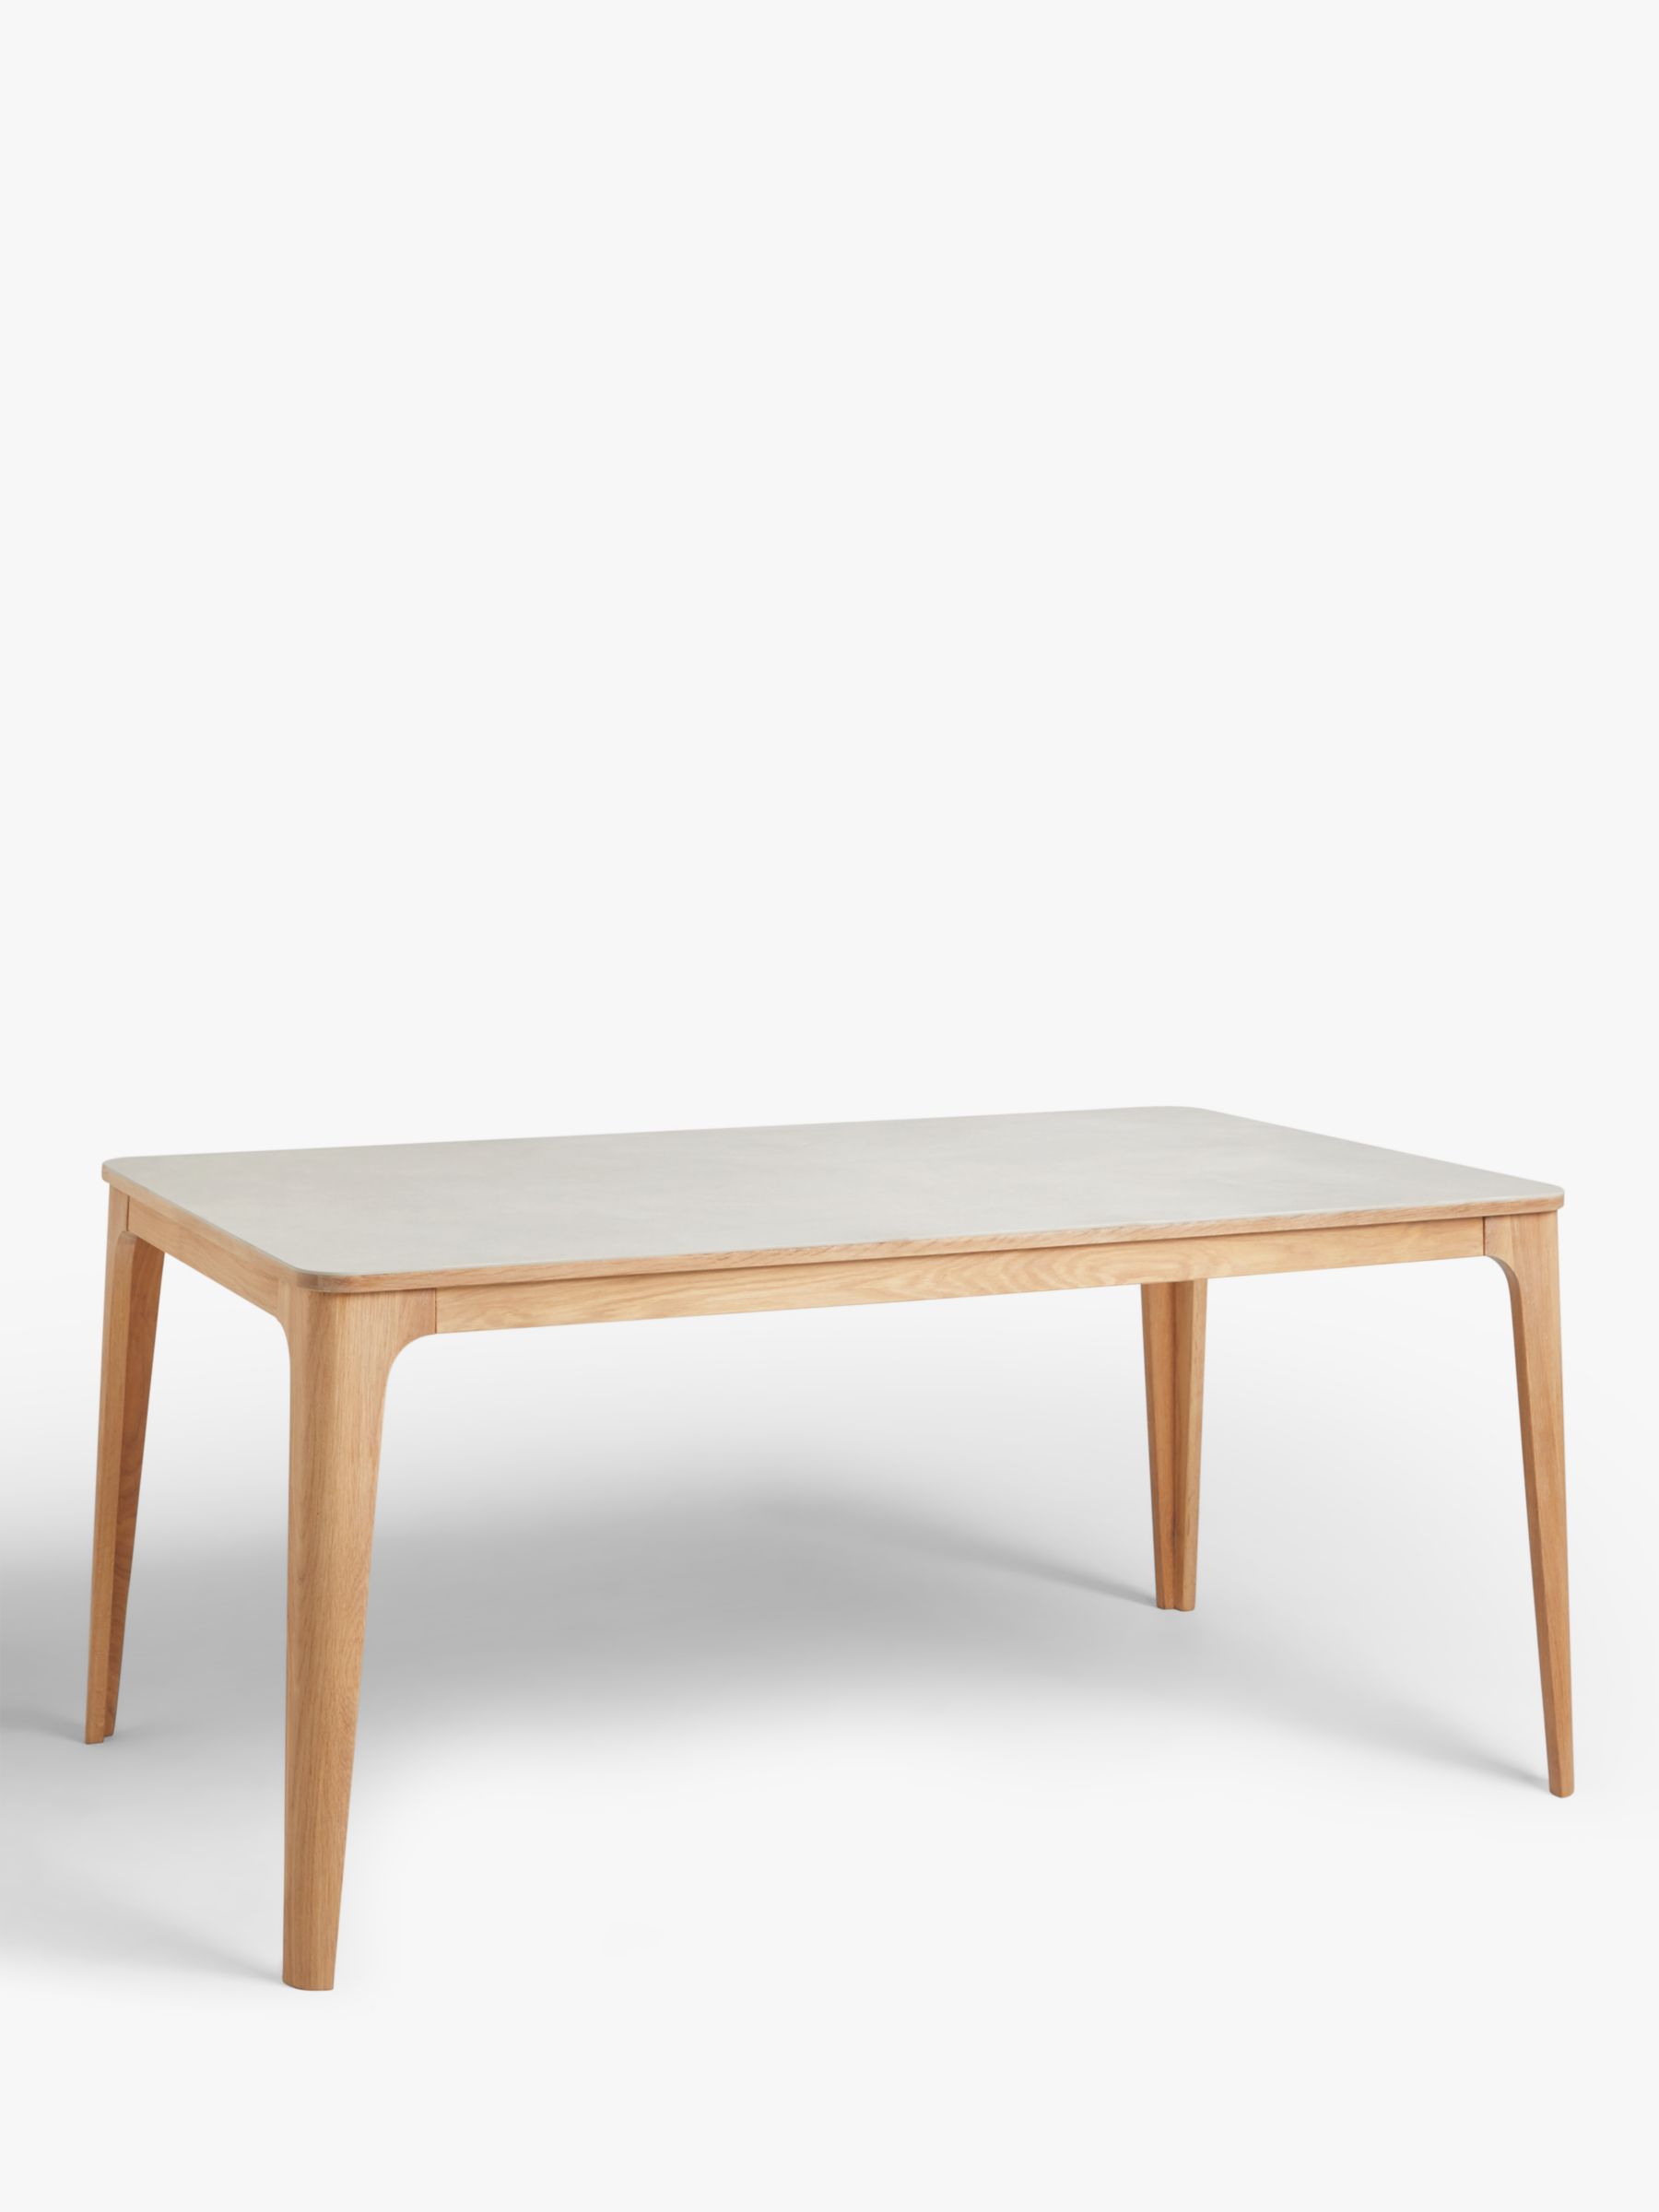 Photo of Ebbe gehl for john lewis mira ceramic top 6 seater dining table